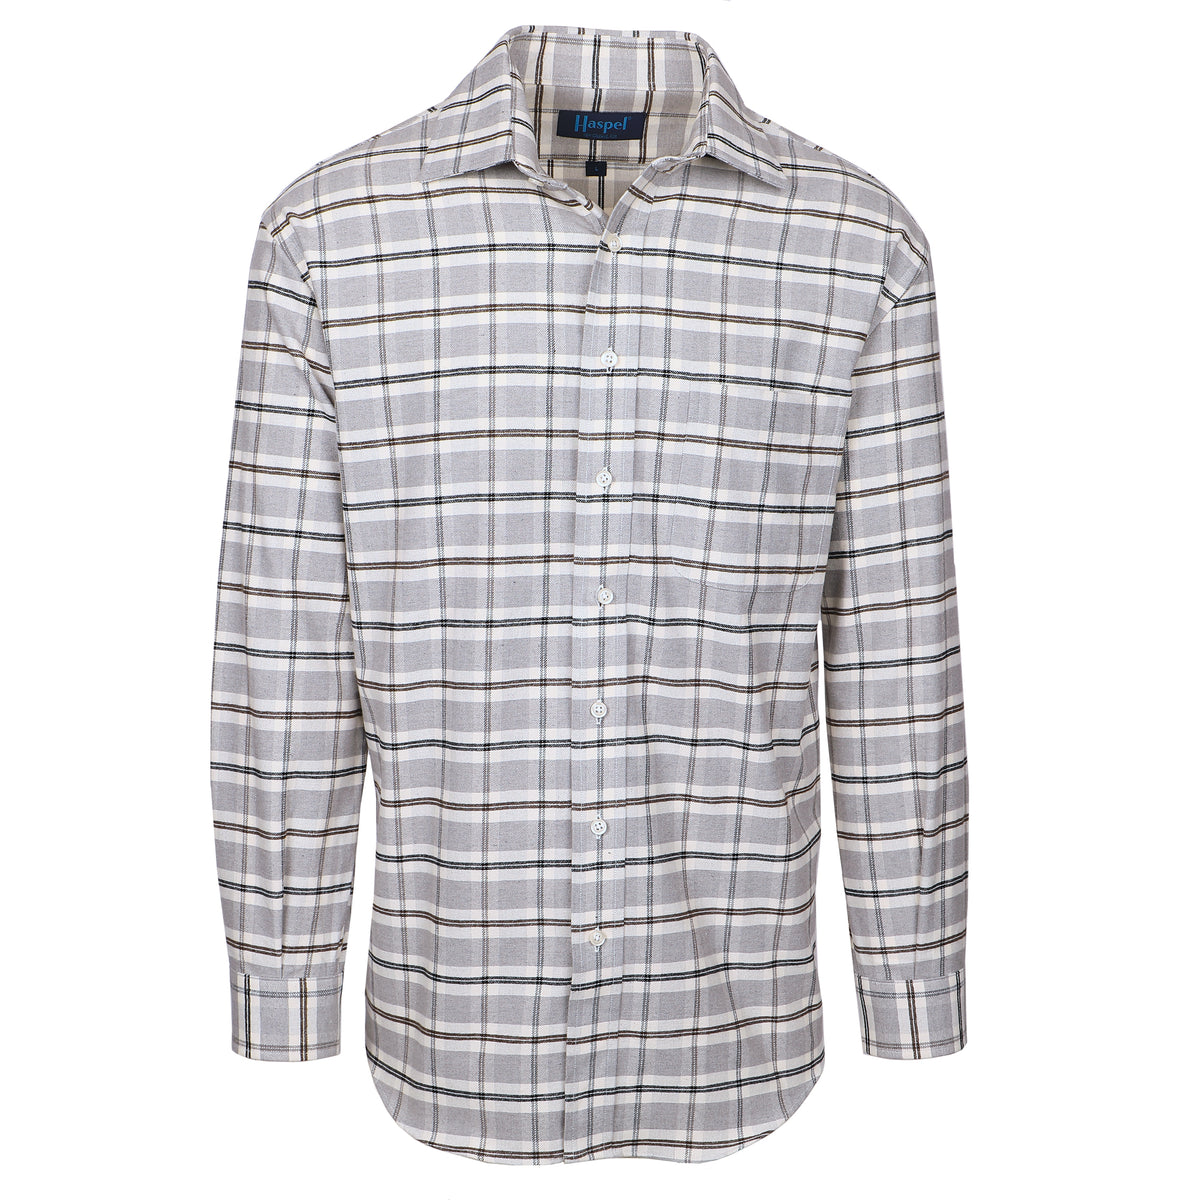 Kick it in neutral gray plaid. Classic style and brushed cotton for comfort.  100% Cotton • Long Sleeve • Spread Collar • Chest Pocket • Classic Fit 